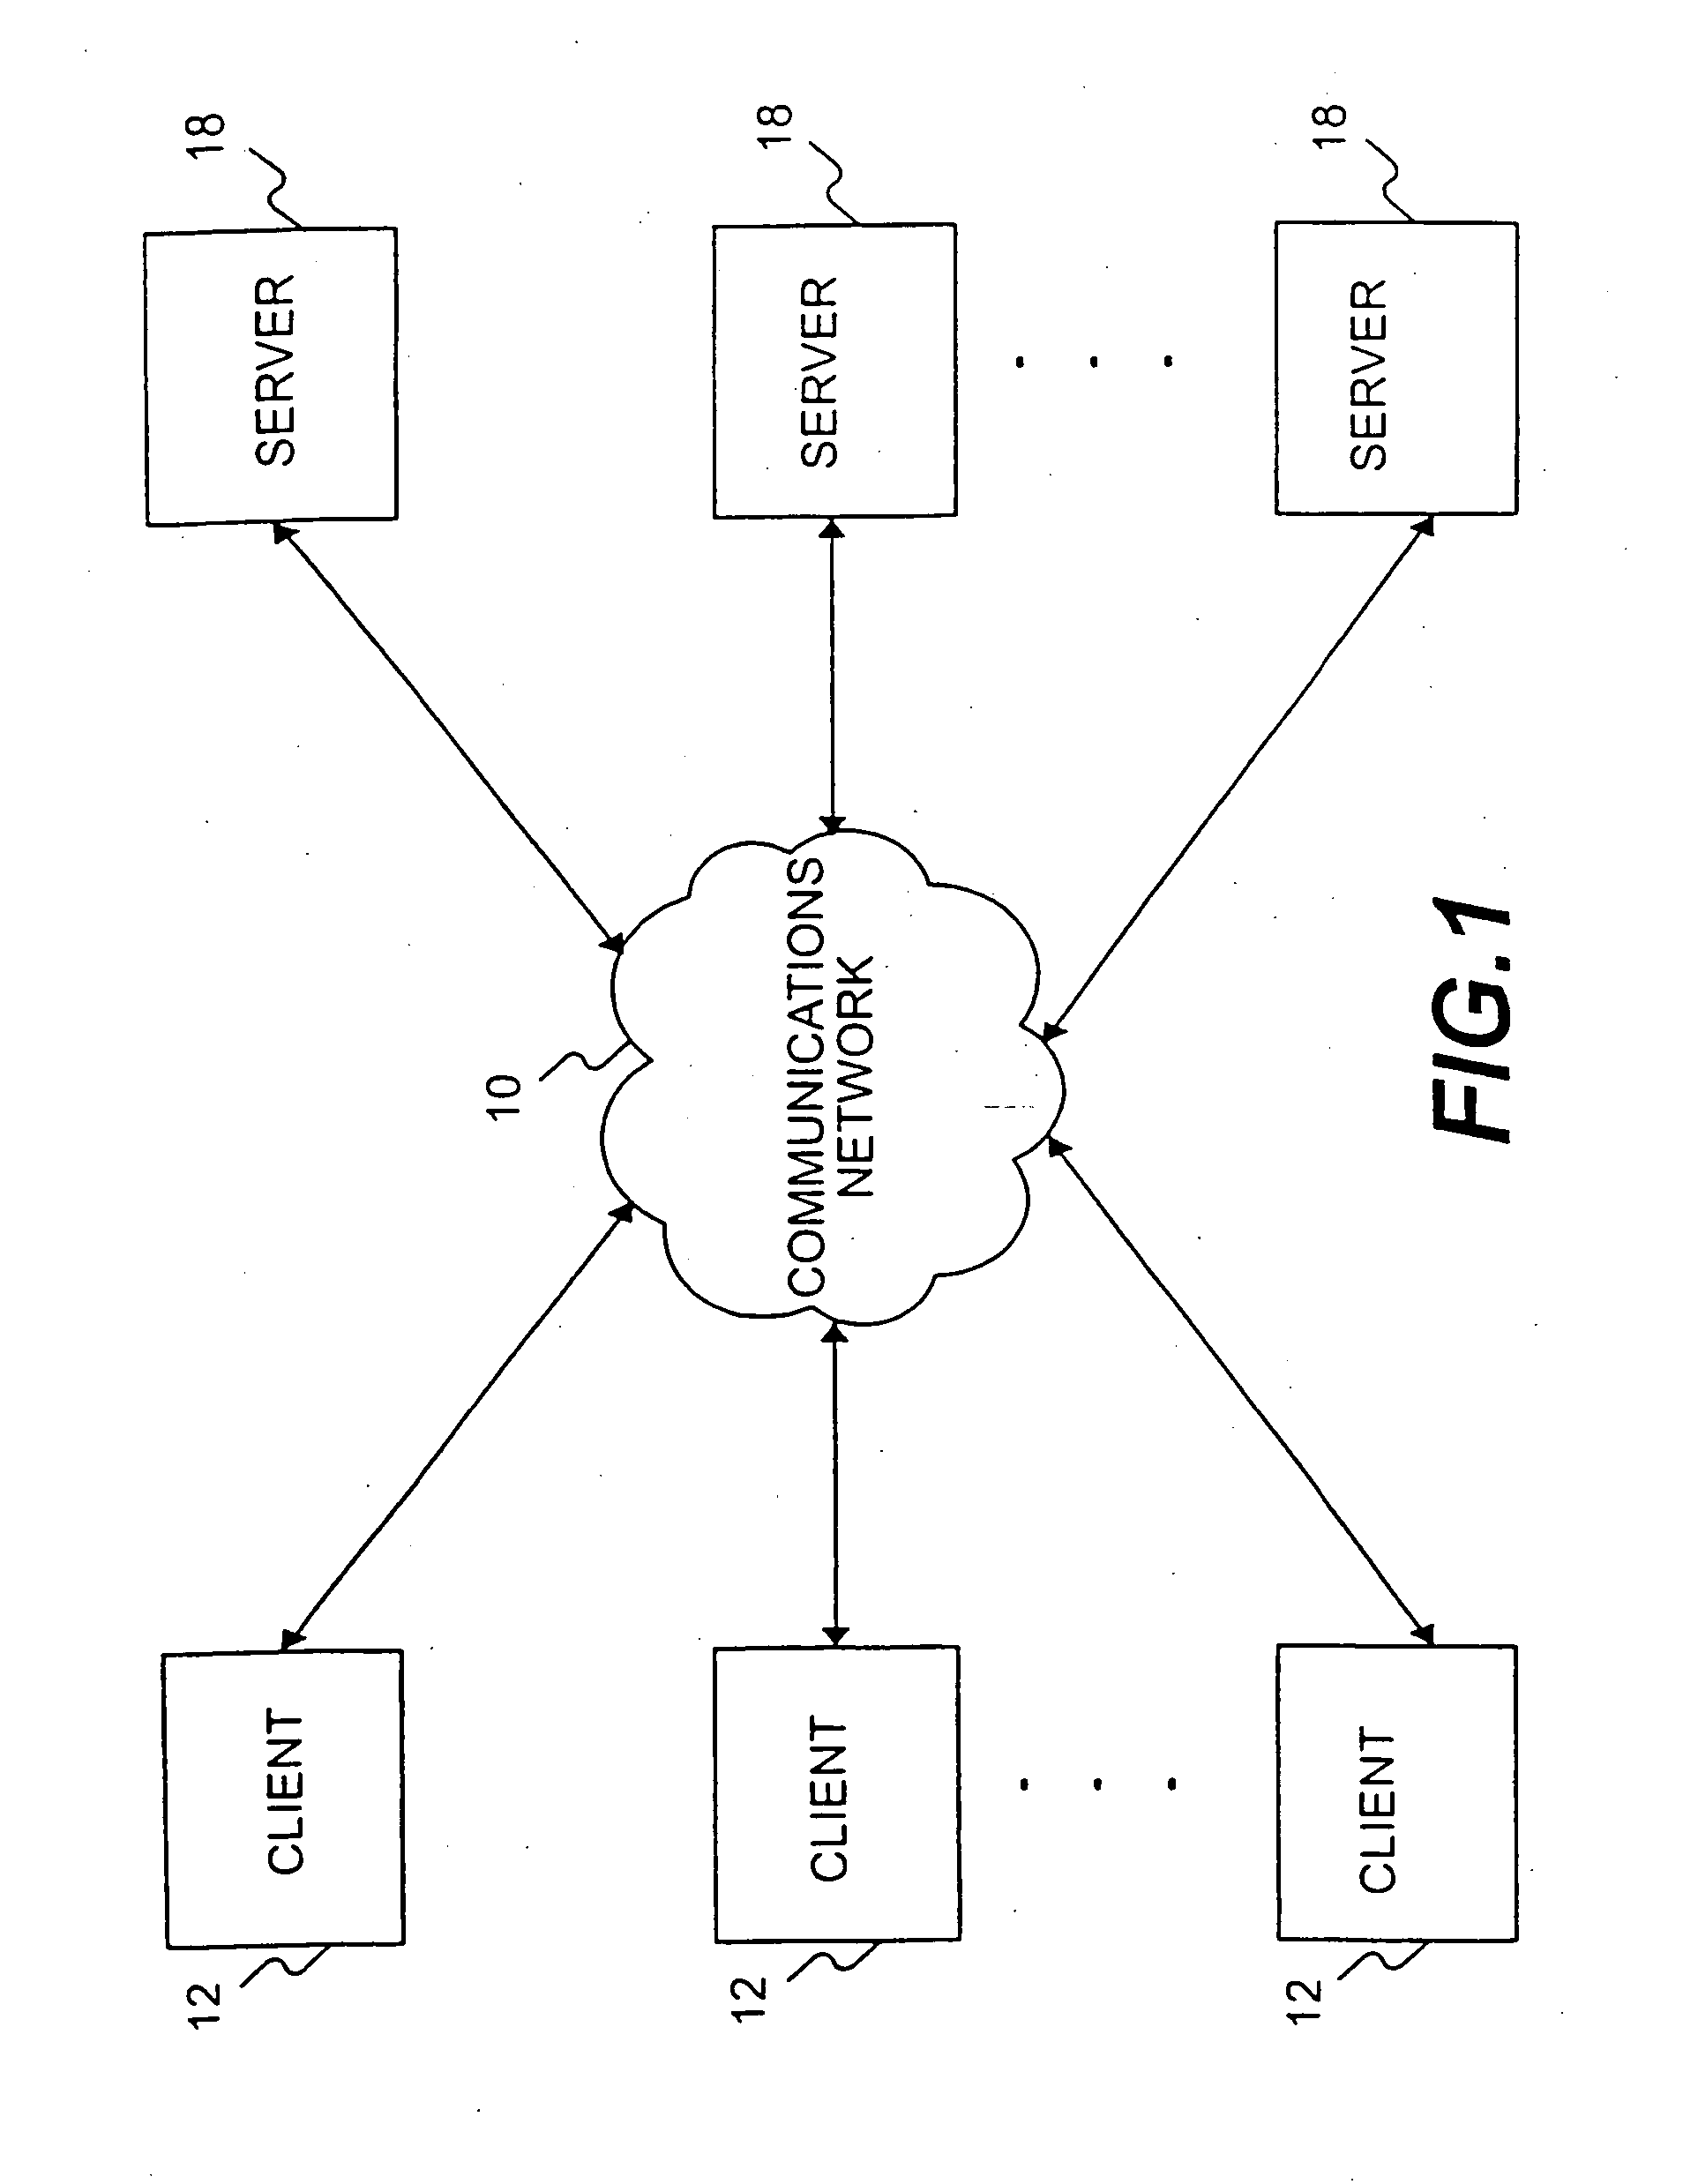 System and method for providing user authentication and identity management